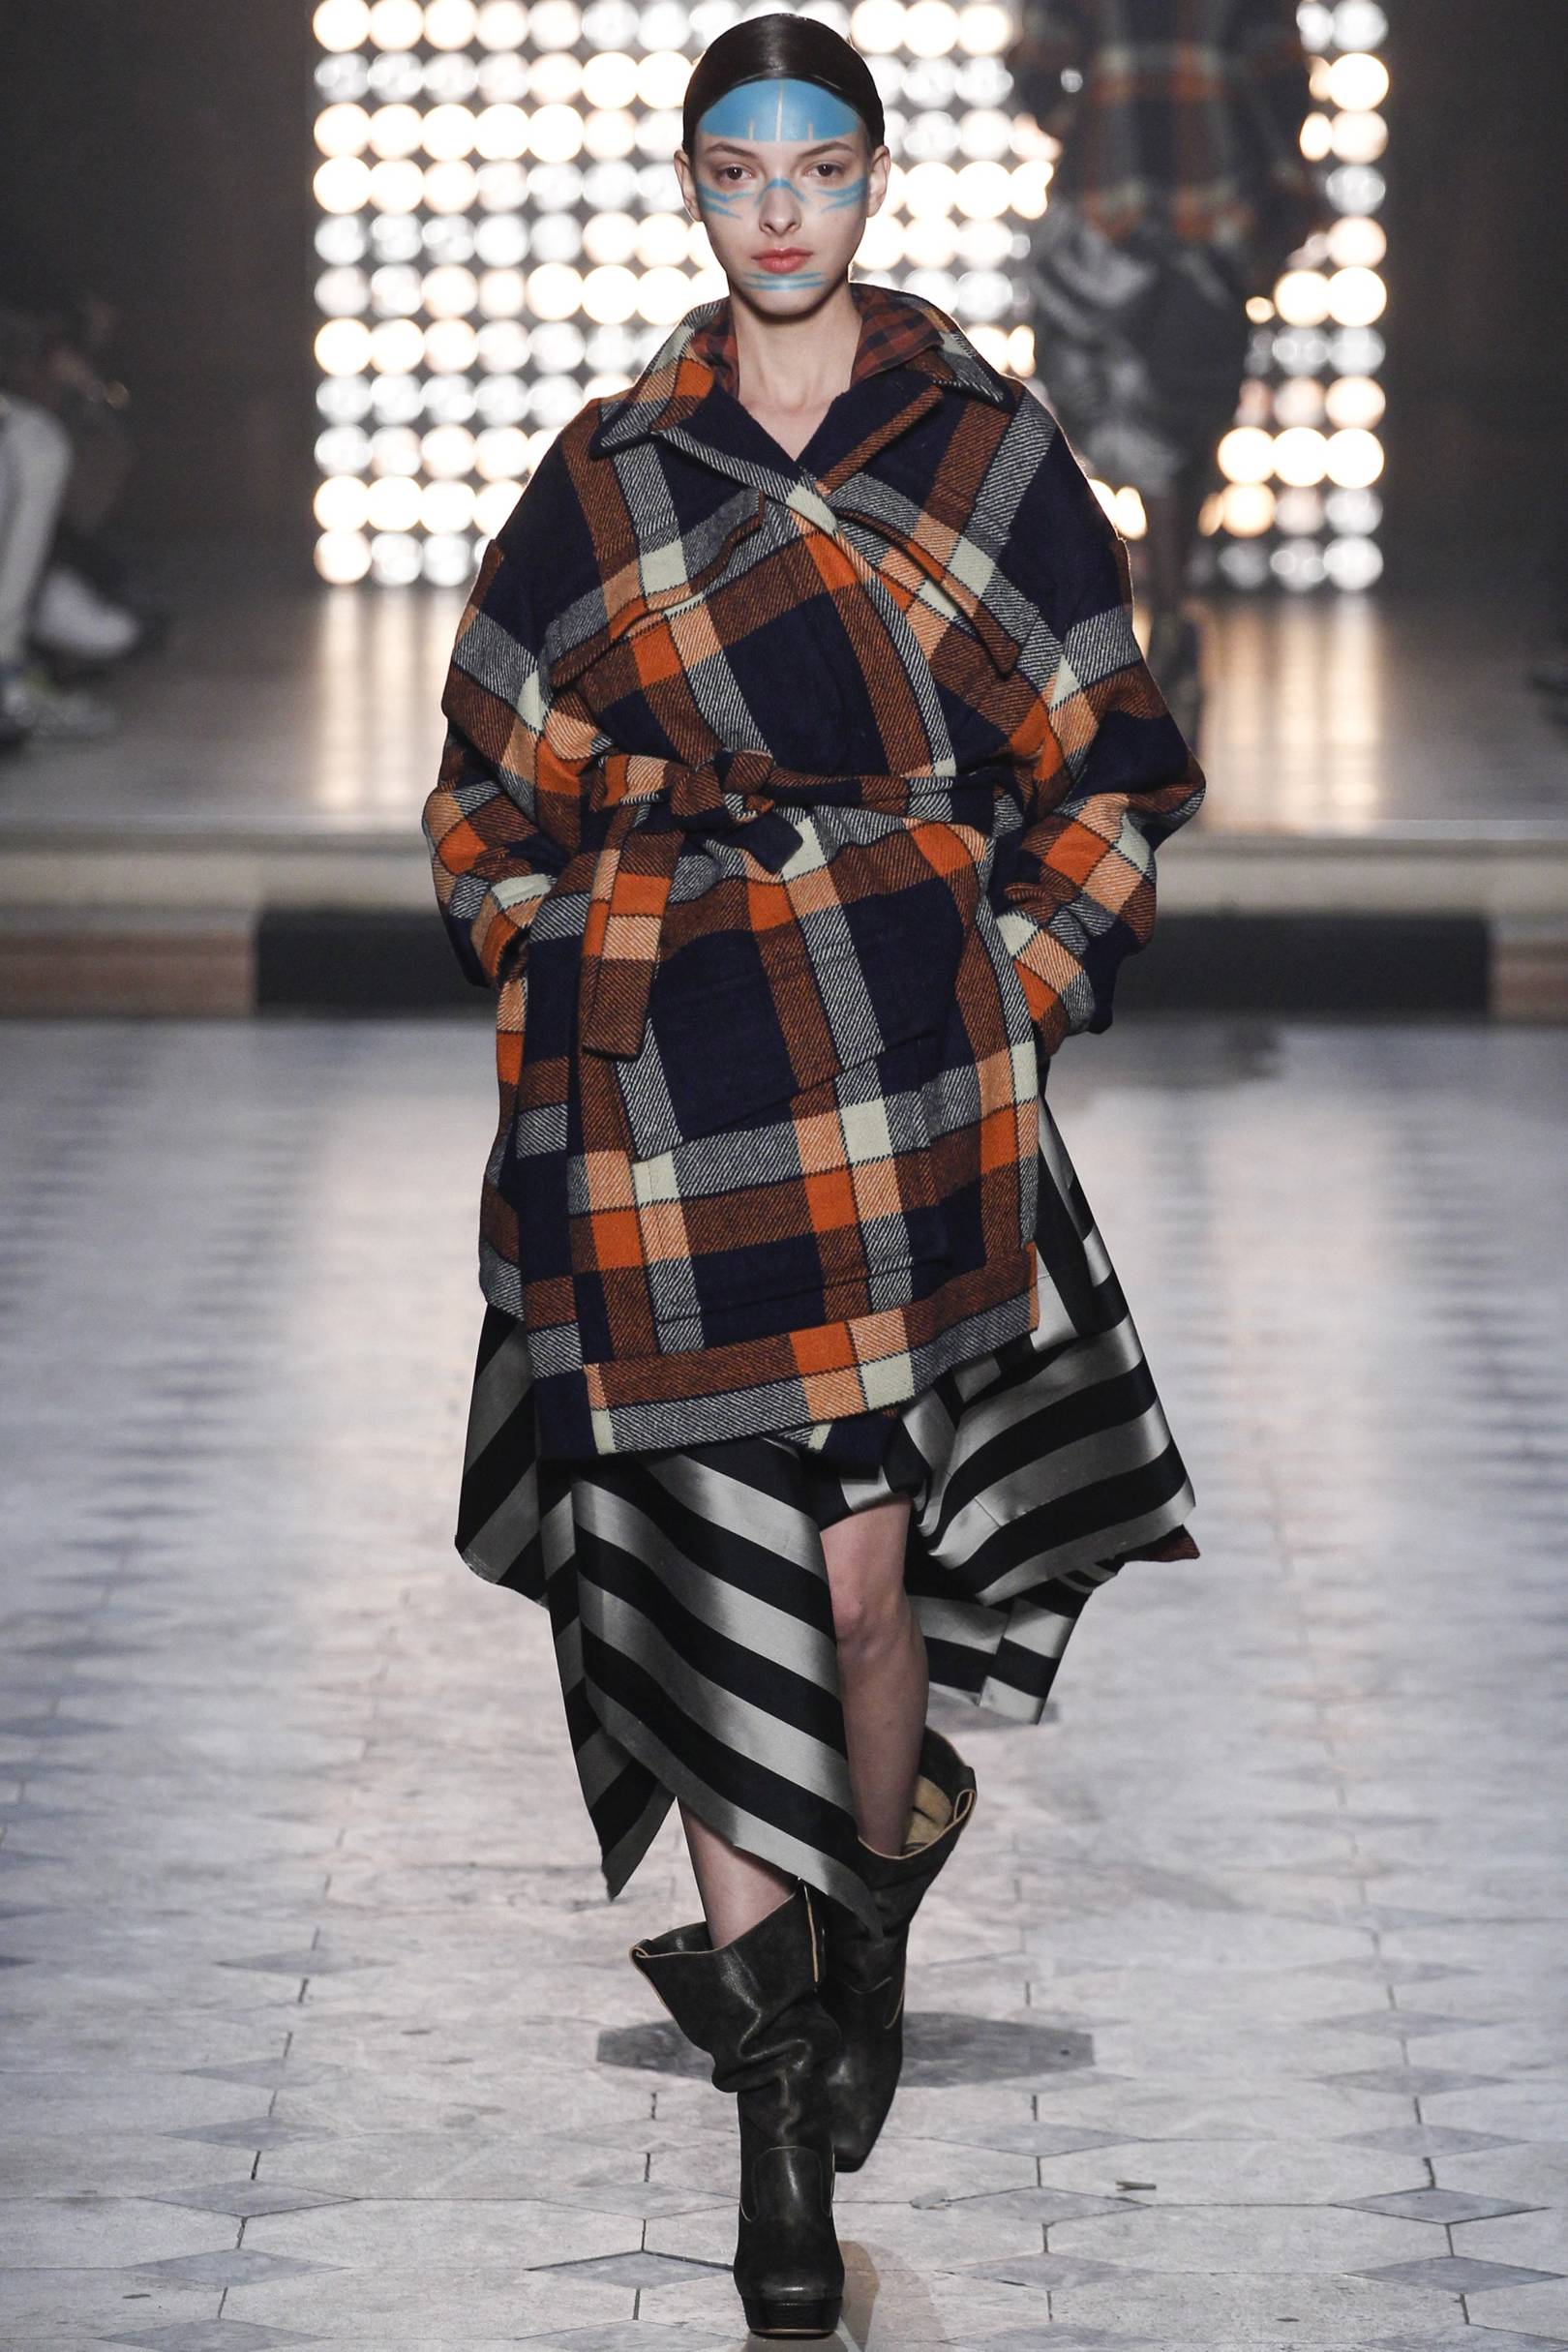 GLAMOUR's Guide To The AW14 Trends | Glamour UK